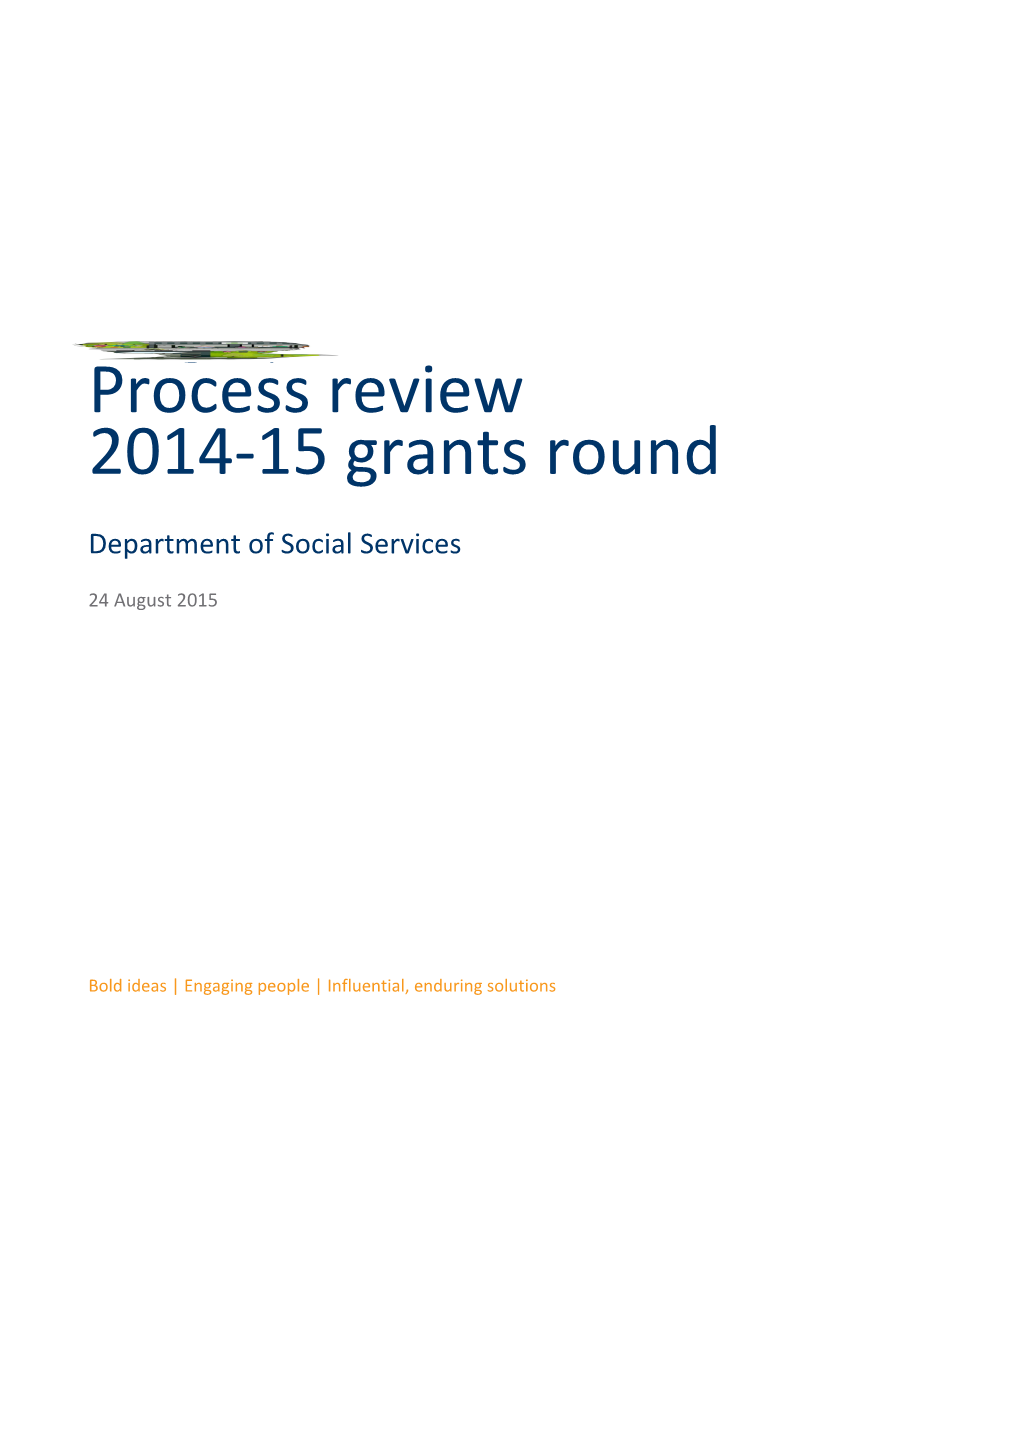 Process Review 2014-15 Grants Round